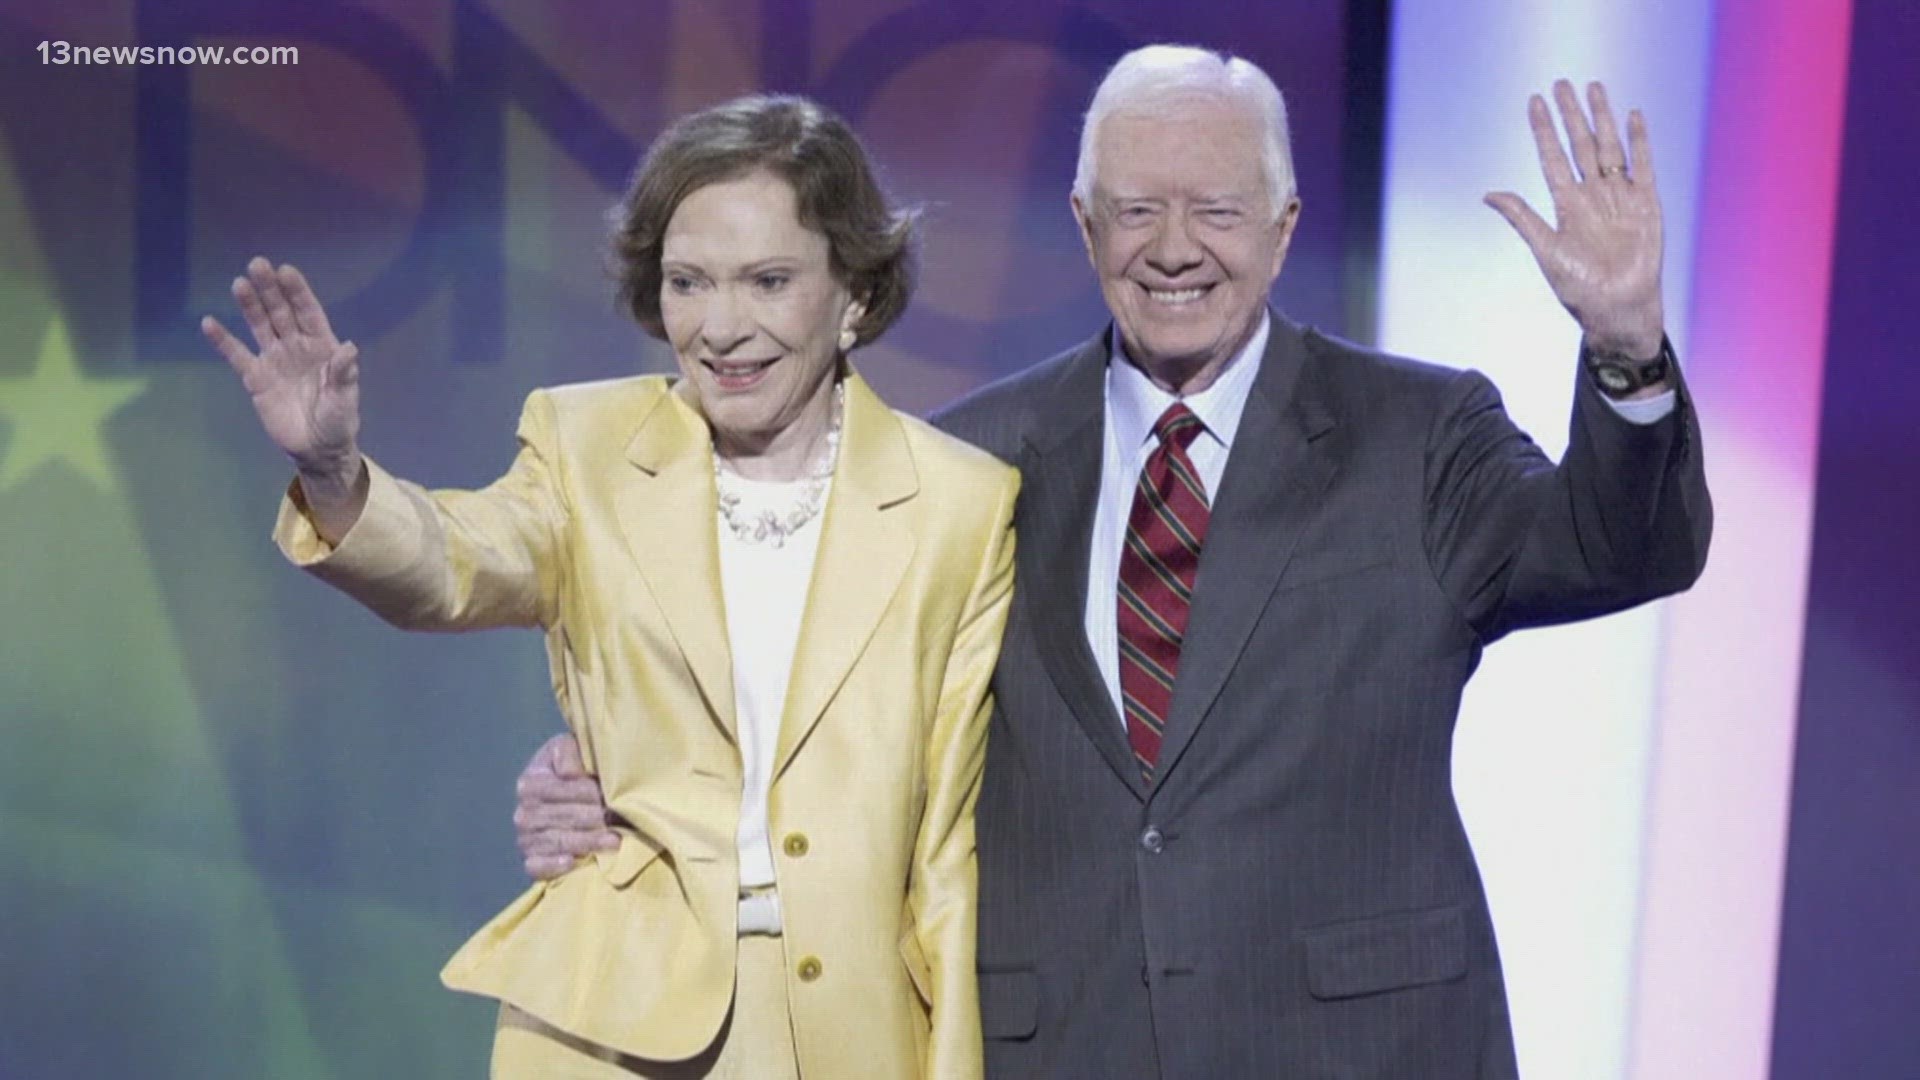 Her longtime husband, former President Jimmy Carter, their family and the public are gathering in Atlanta for ceremonies honoring her life.